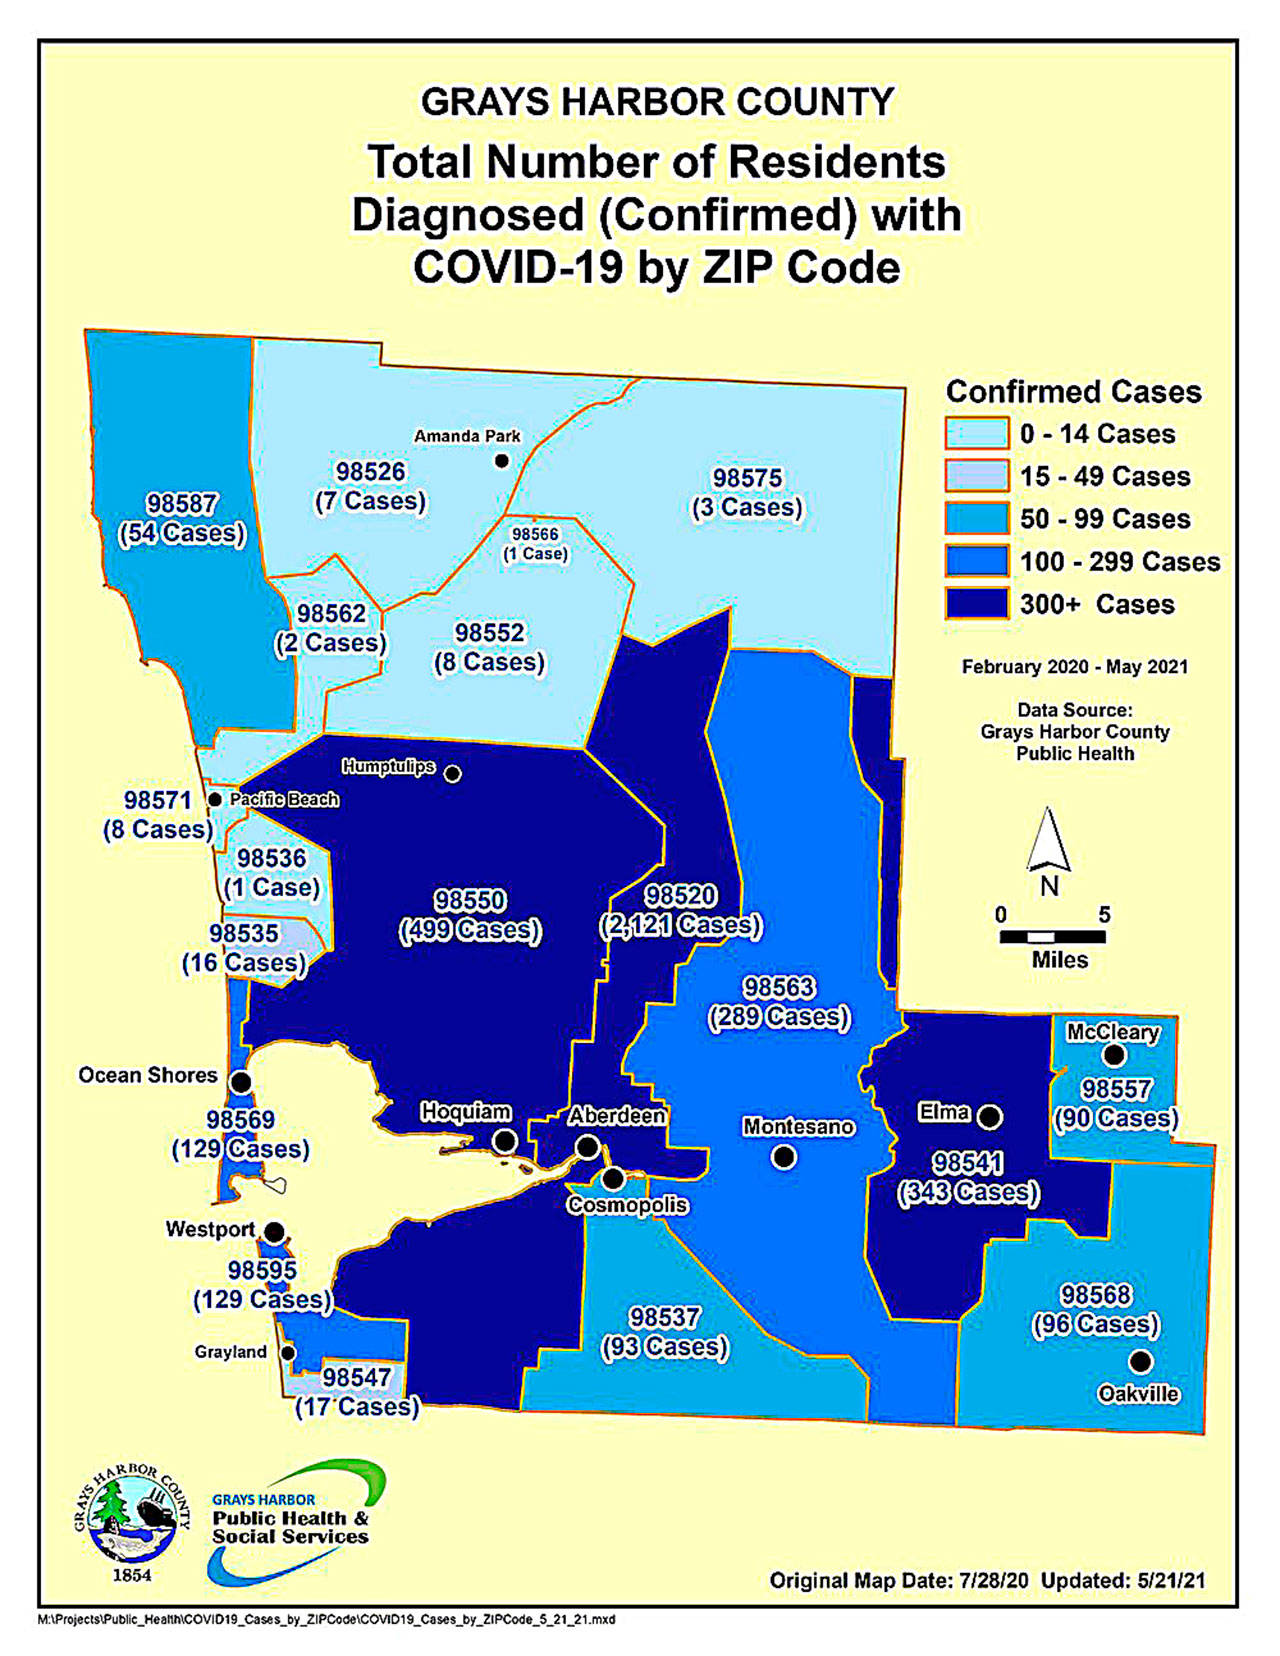 COVID-19 cases in Grays Harbor County, updated by Grays Harbor Public Health Friday, May 21.